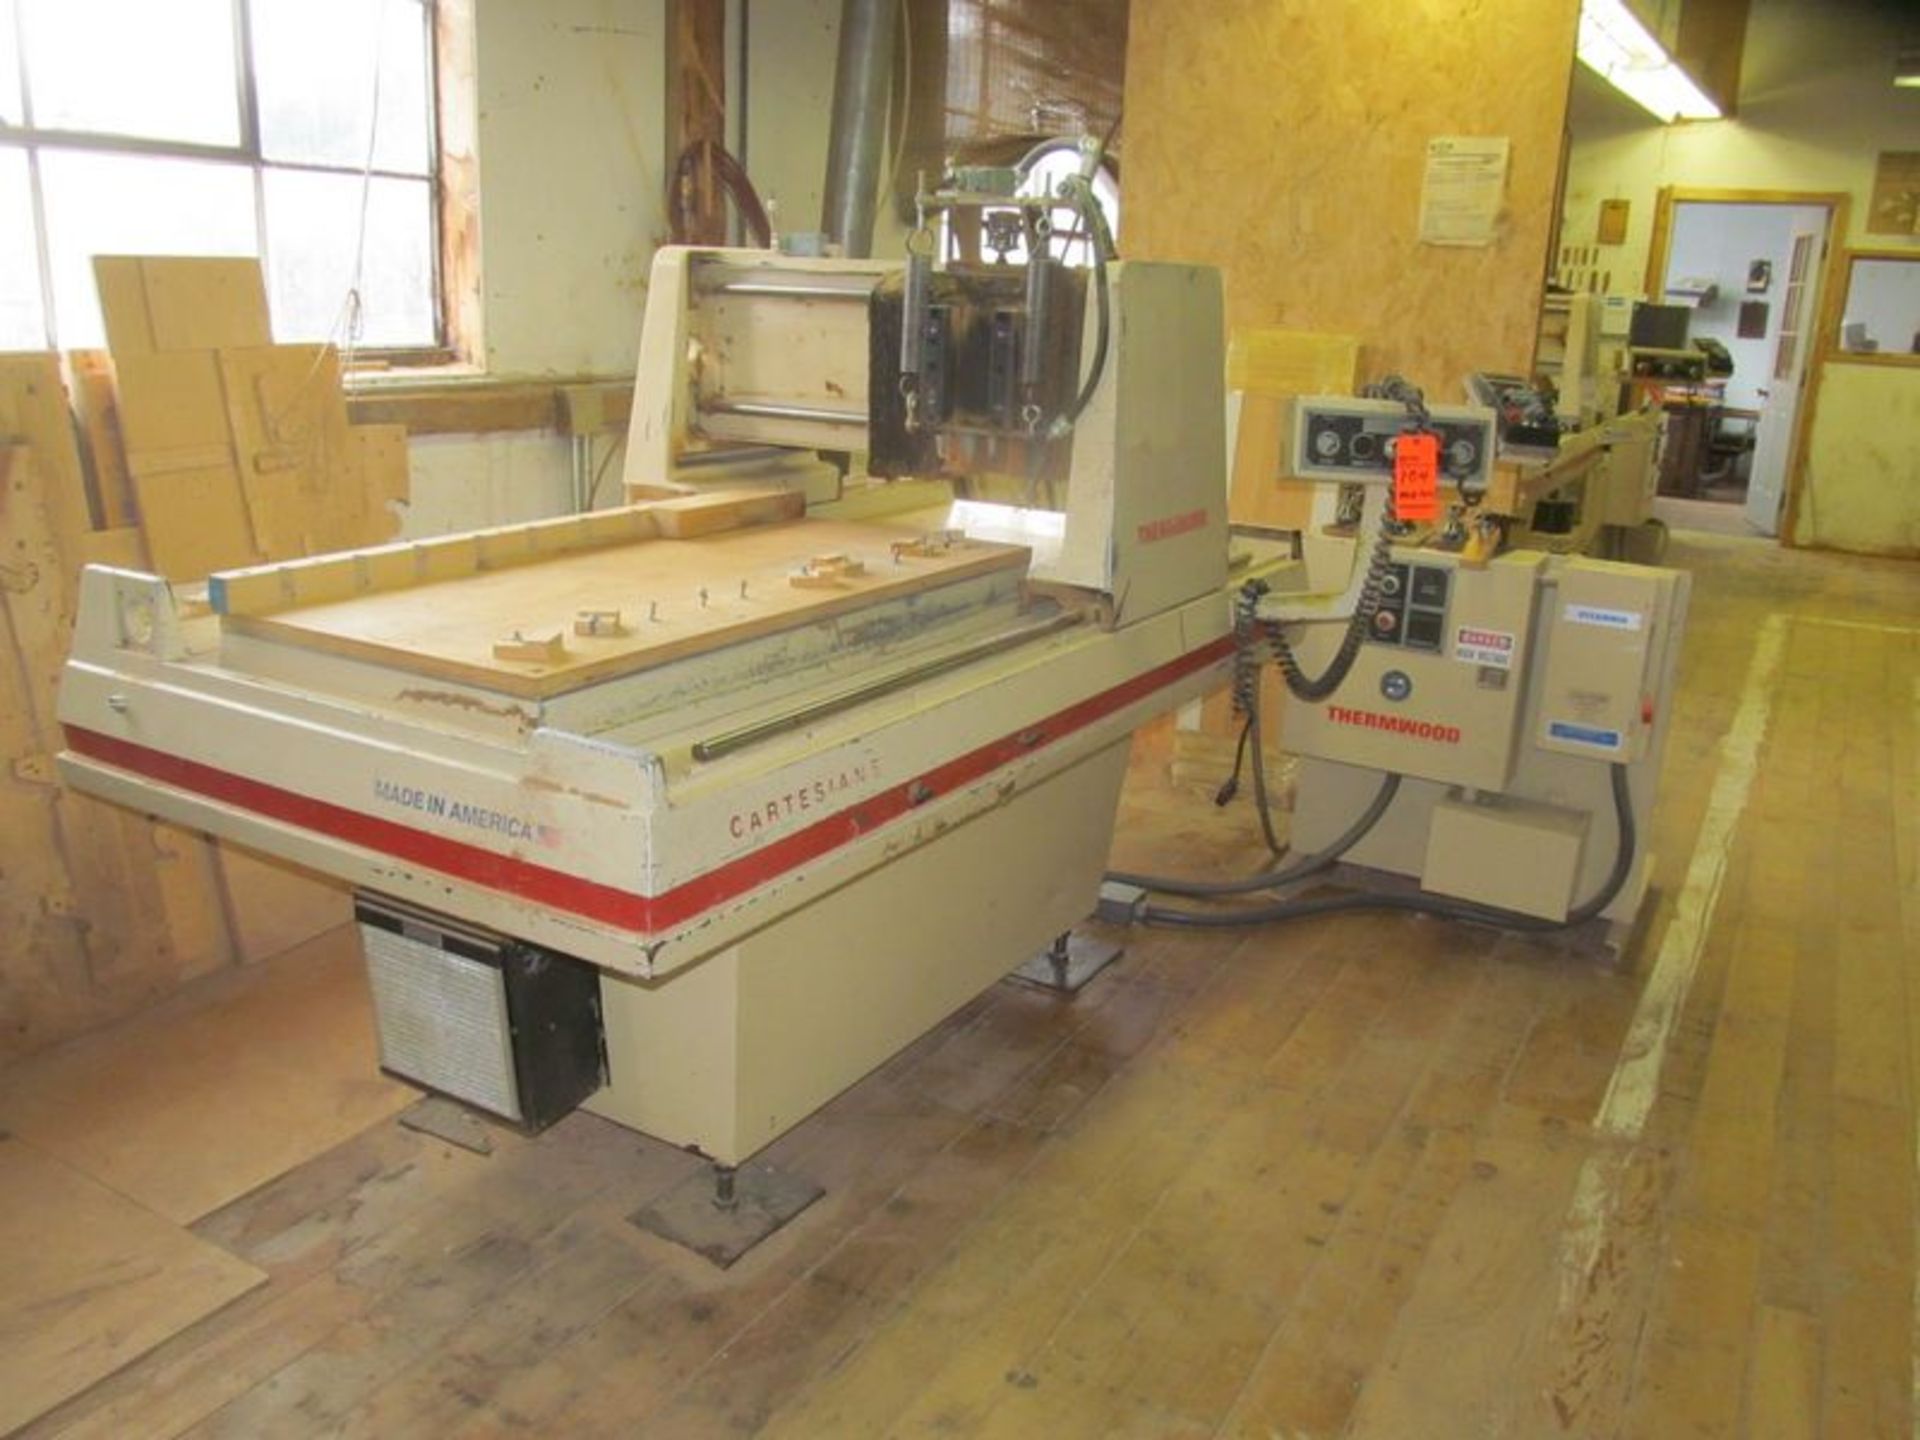 Thermwood Cartesian 5 CNC router, M/N C20, S/N C2006VP0371283, with 12 HP spindle, 3 PH, 220V, 22.